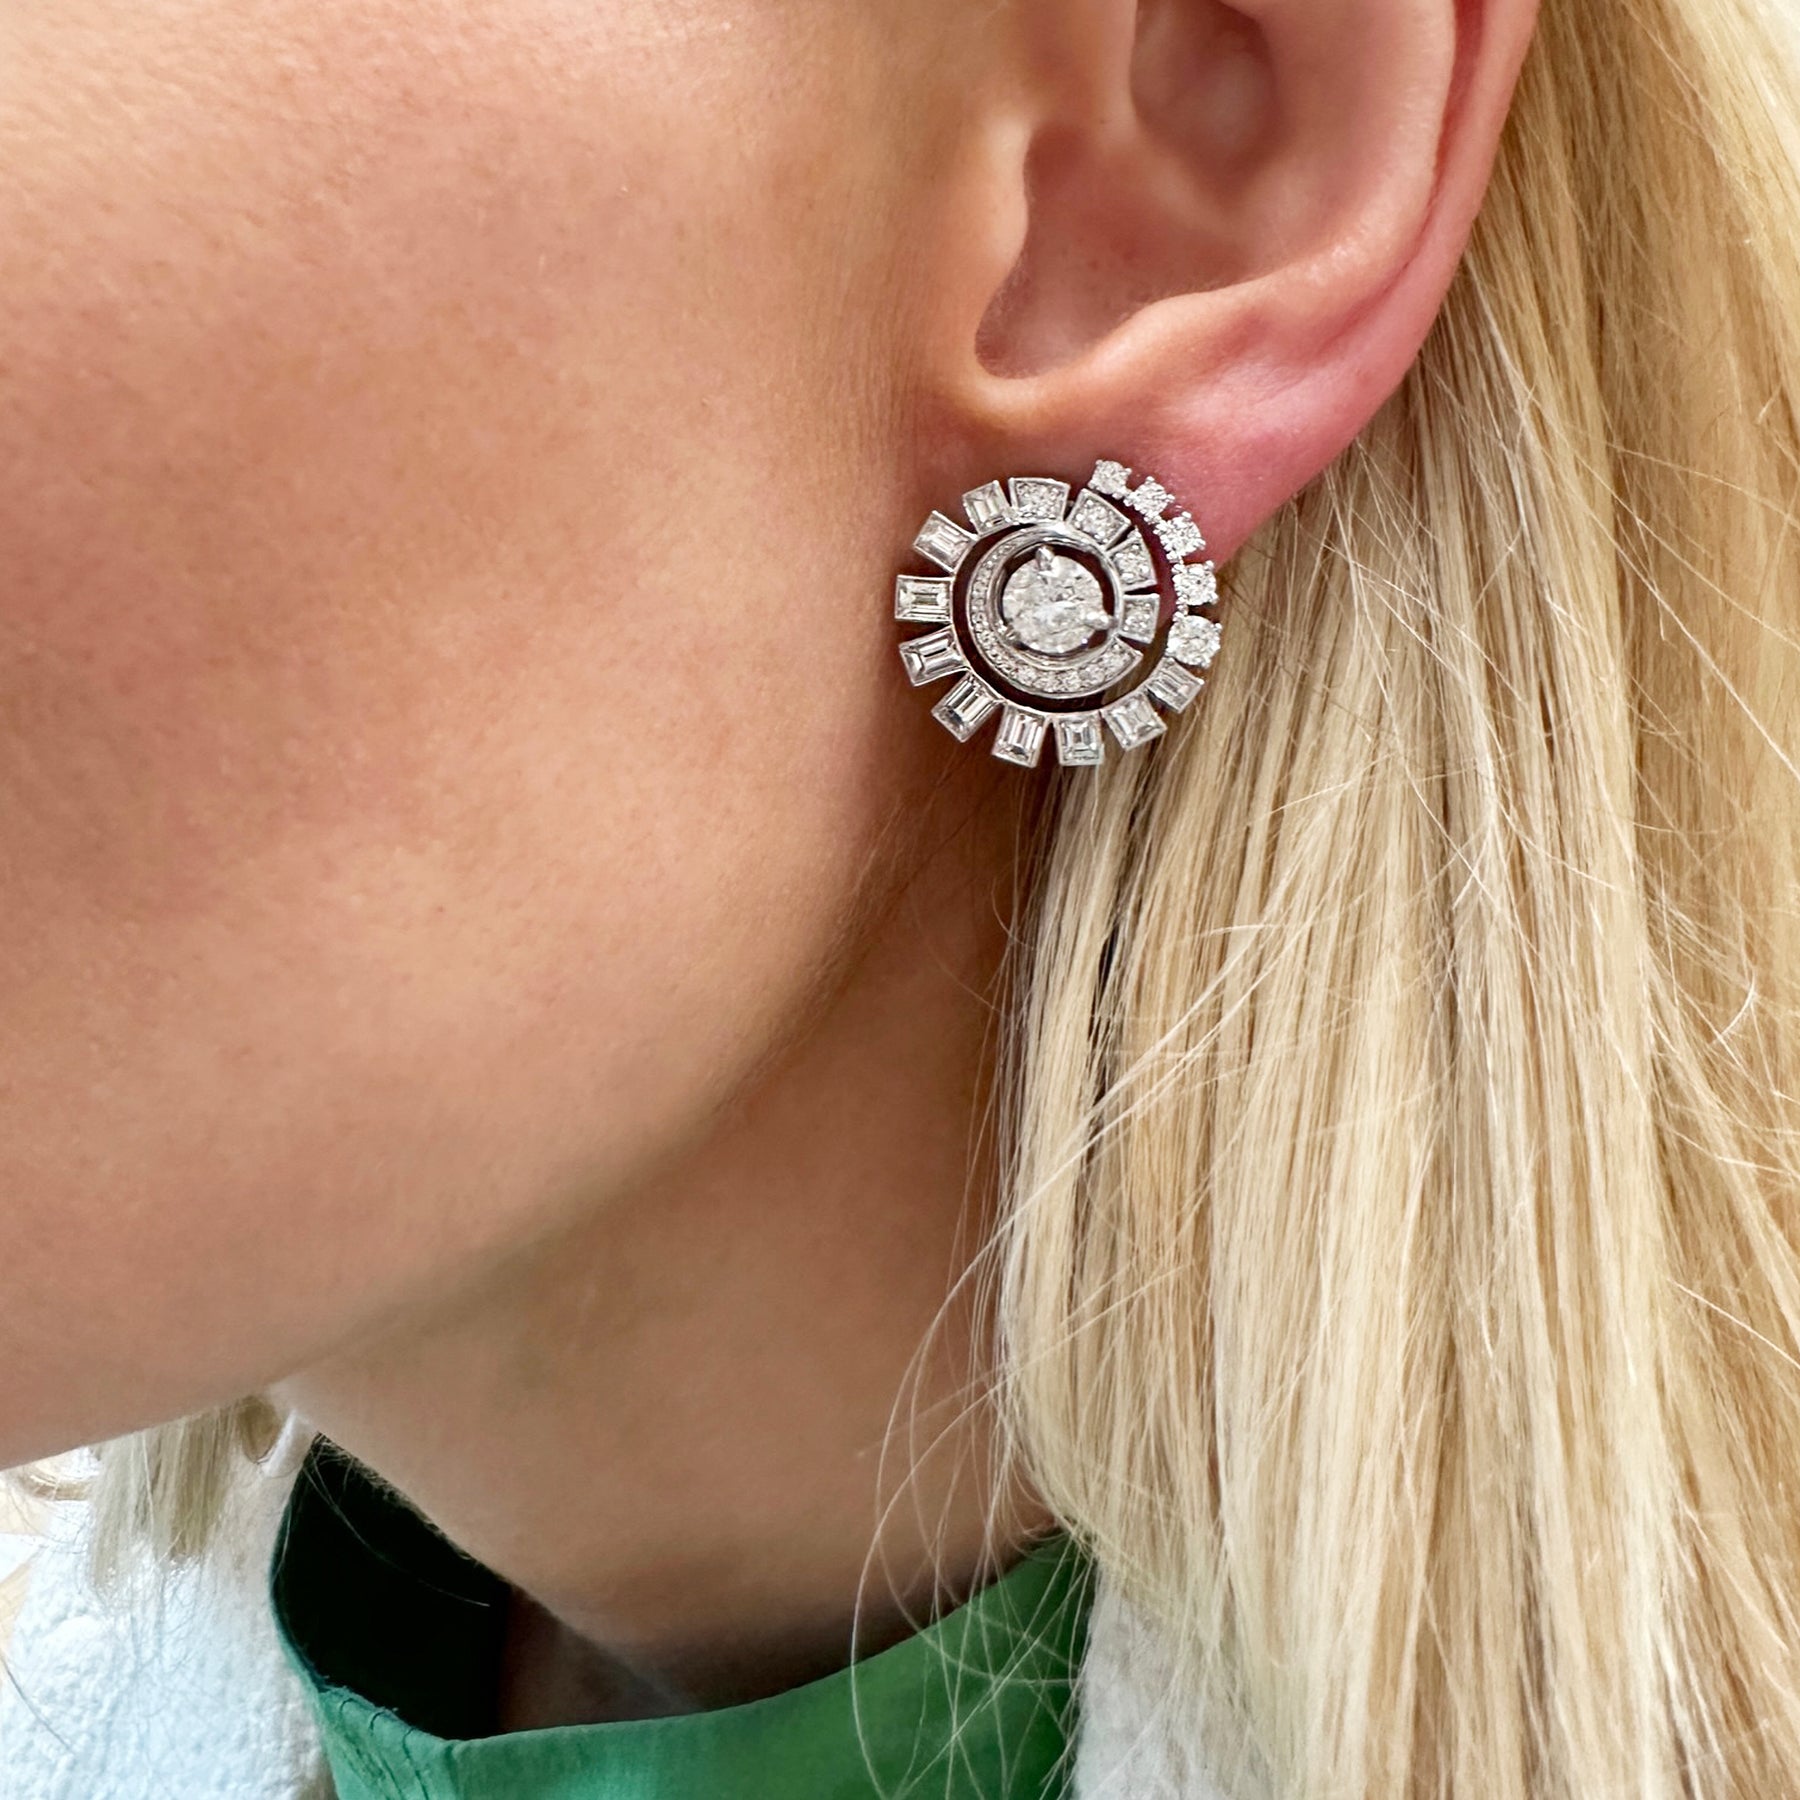 Celestial Swirl Ear Jackets in White Gold with Mixed Shape Diamonds